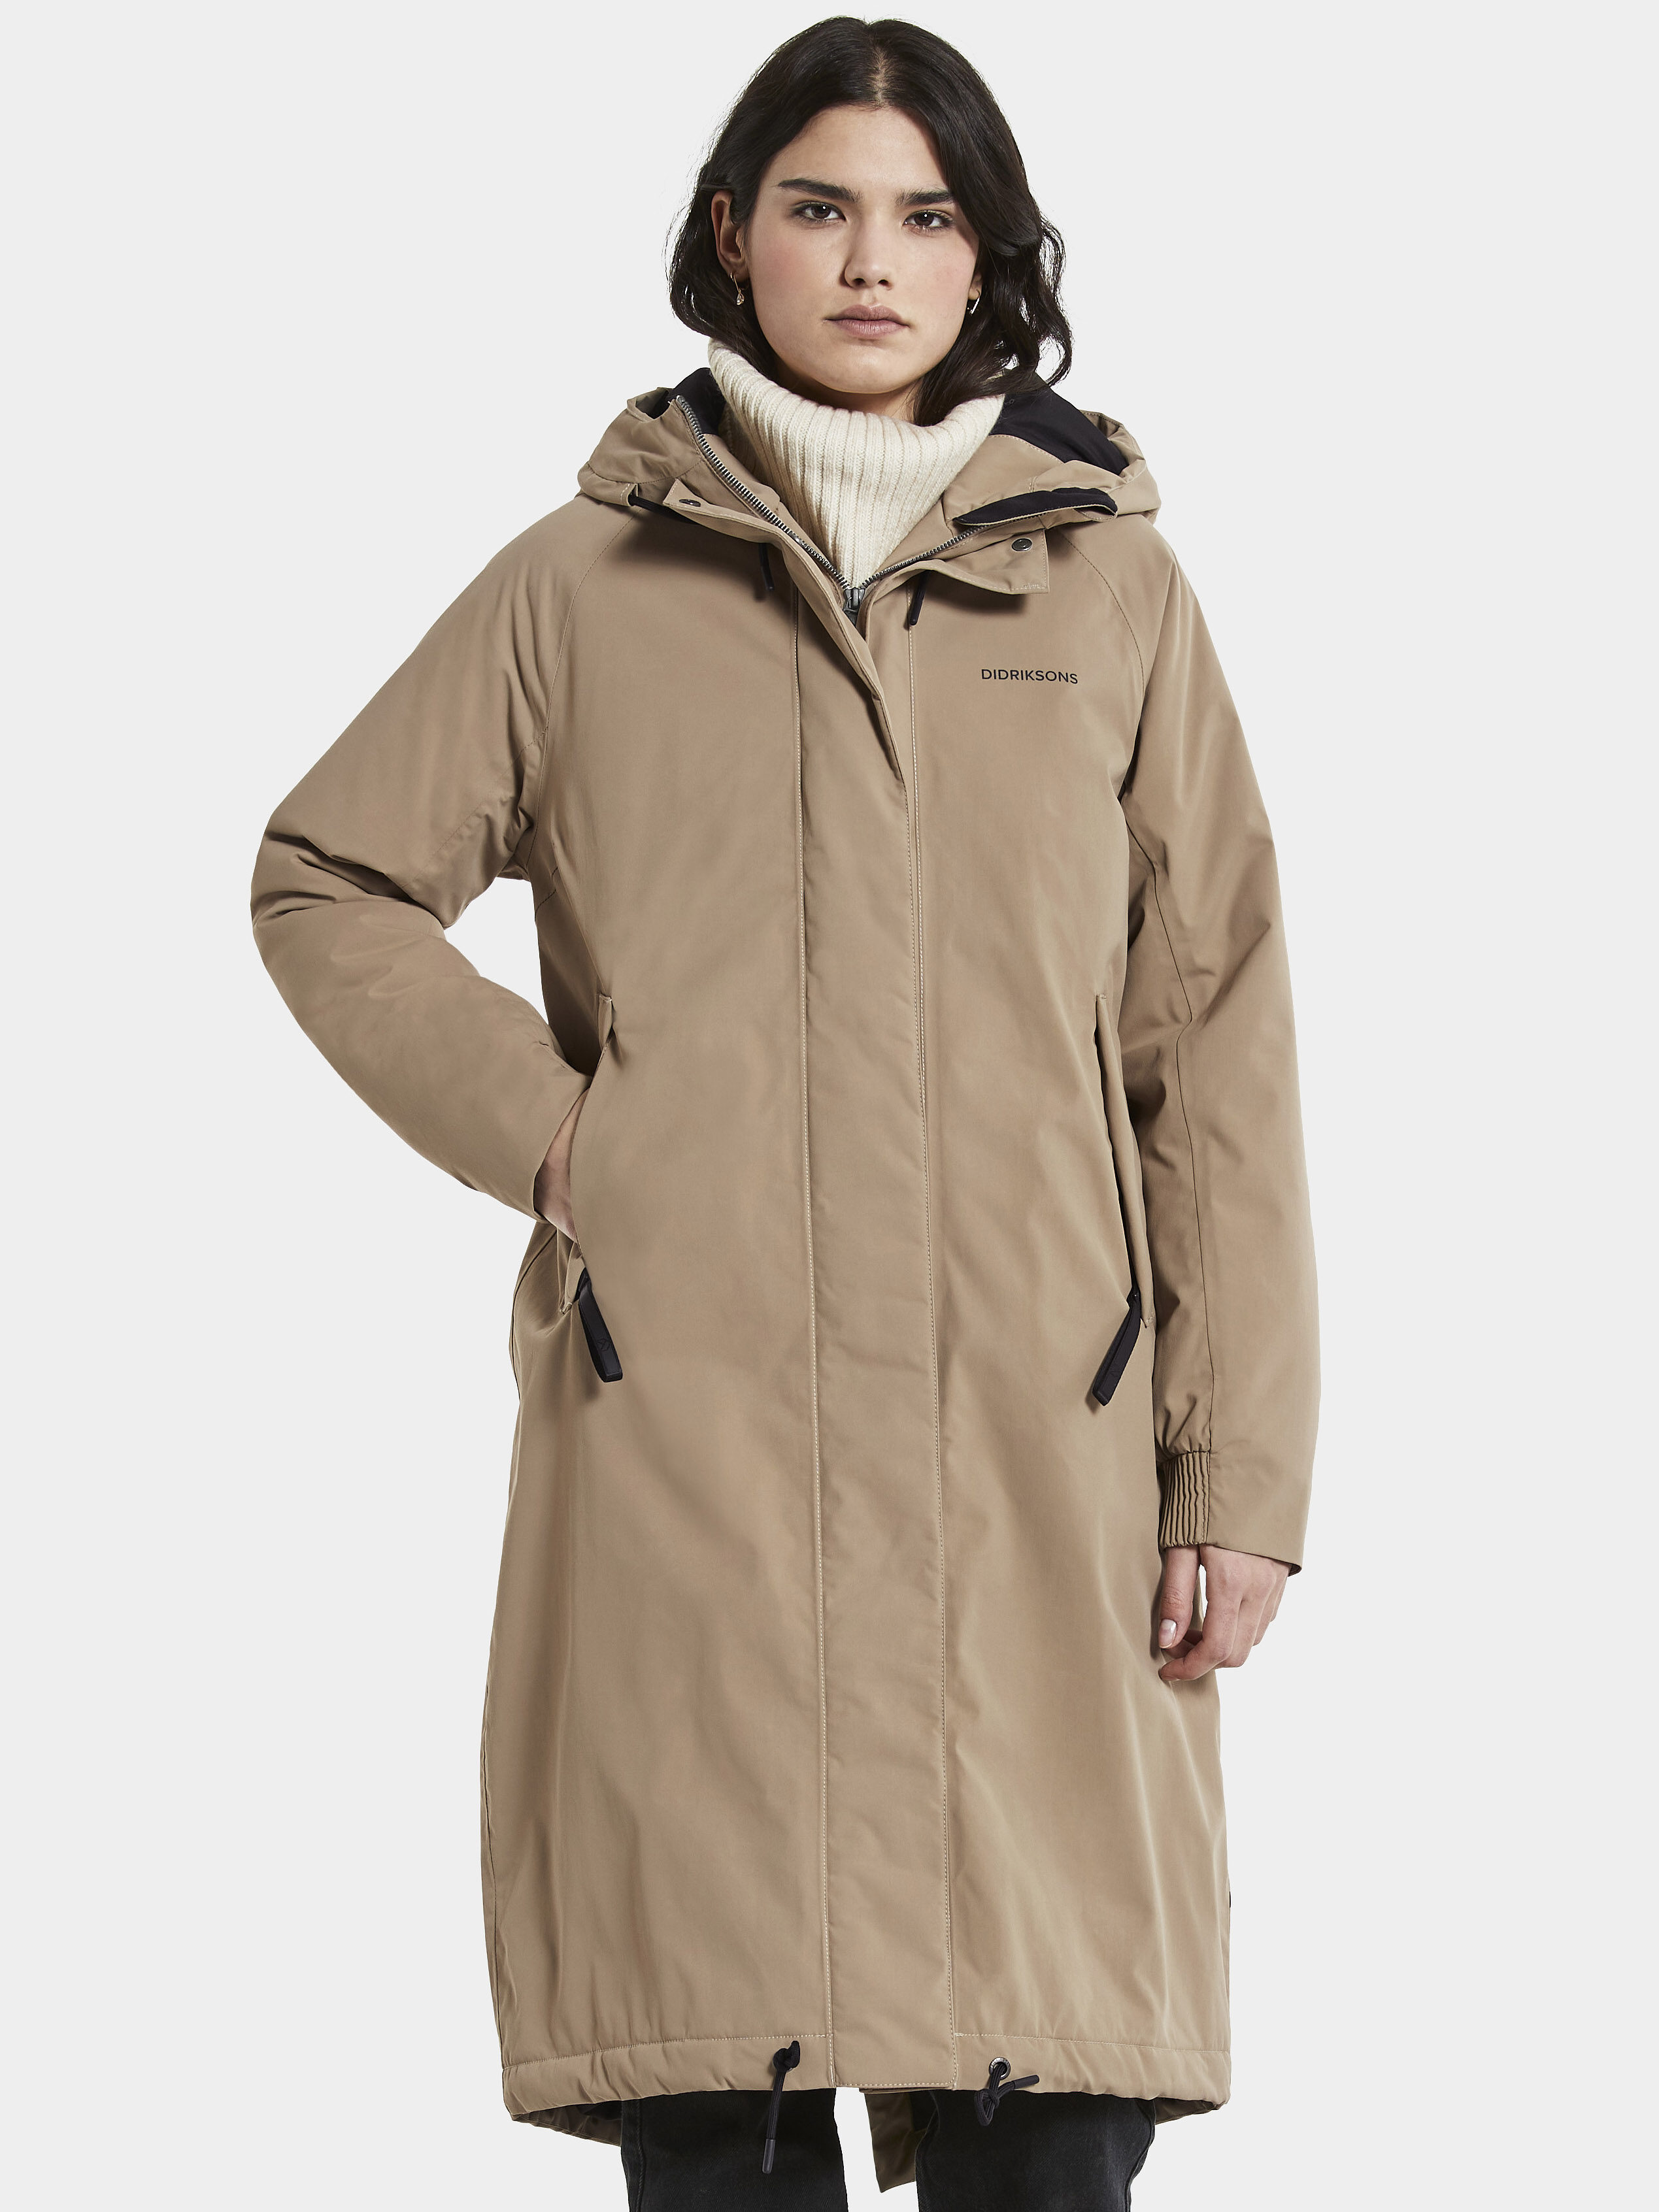 Alicia Oversize Parka Long - Didriksons